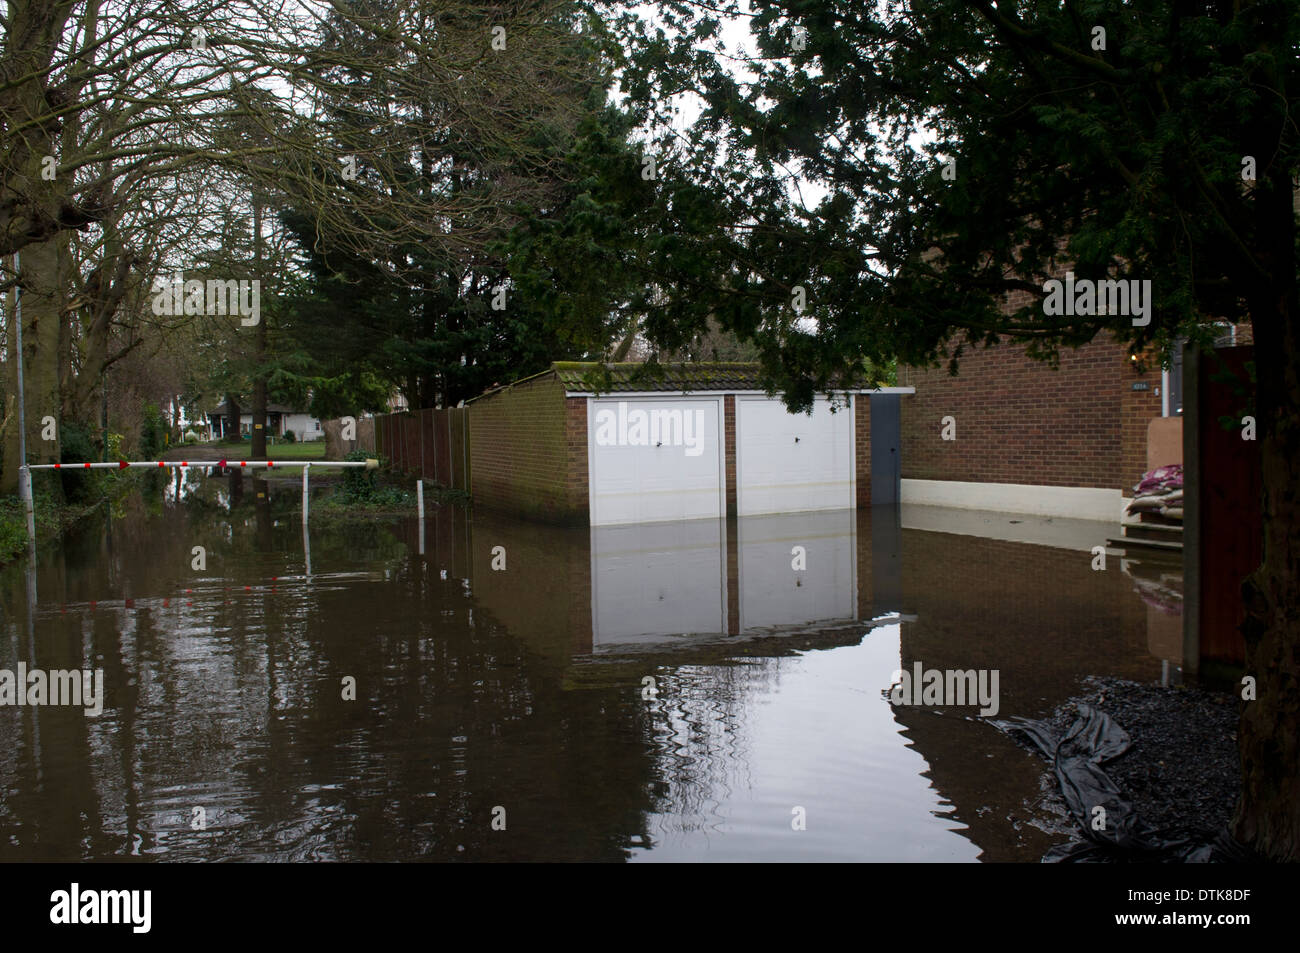 Flooded residential area and park in Staines. Driveway totally flooded with sandbags and wooden board covering front door and steps for protection. Driveway has twin white garages. Stock Photo